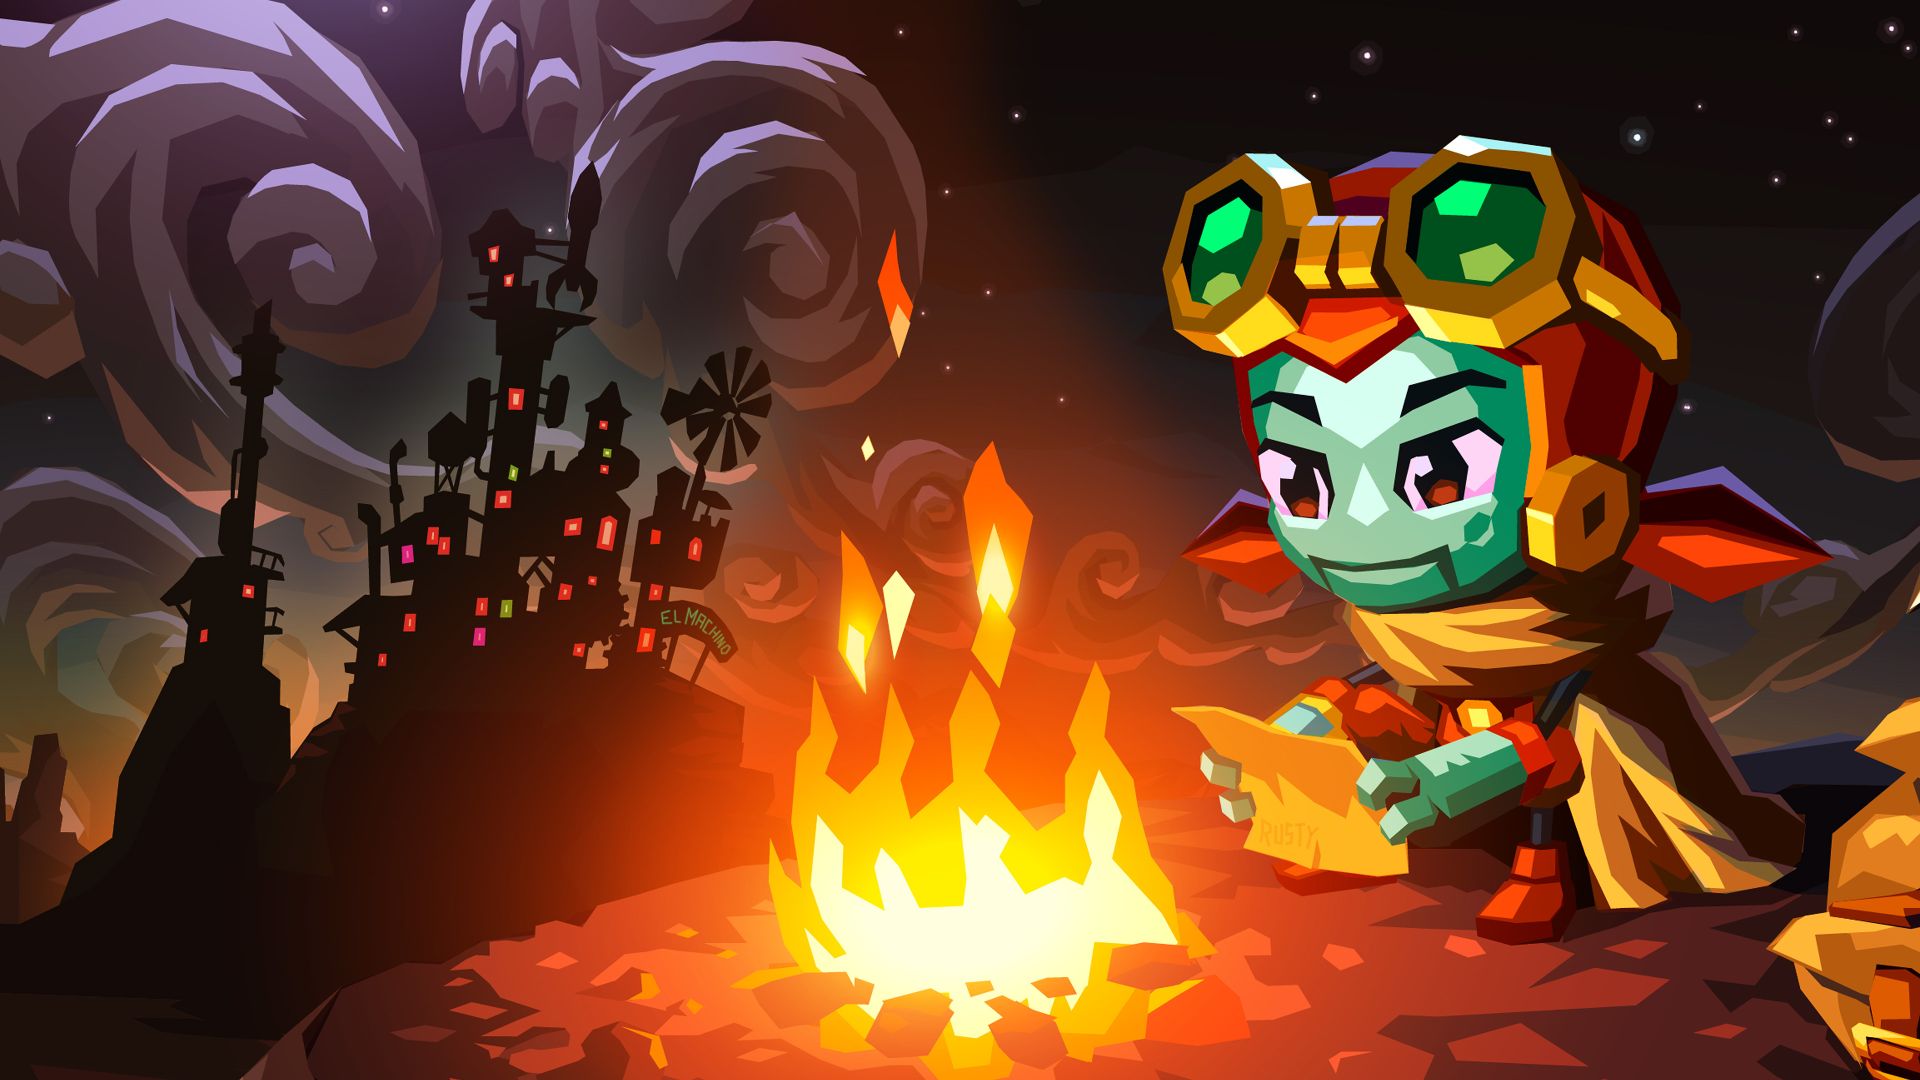 HD wallpaper of SteamWorld Dig 2 featuring the robot protagonist by a campfire with a dark, swirled skyline in the background.